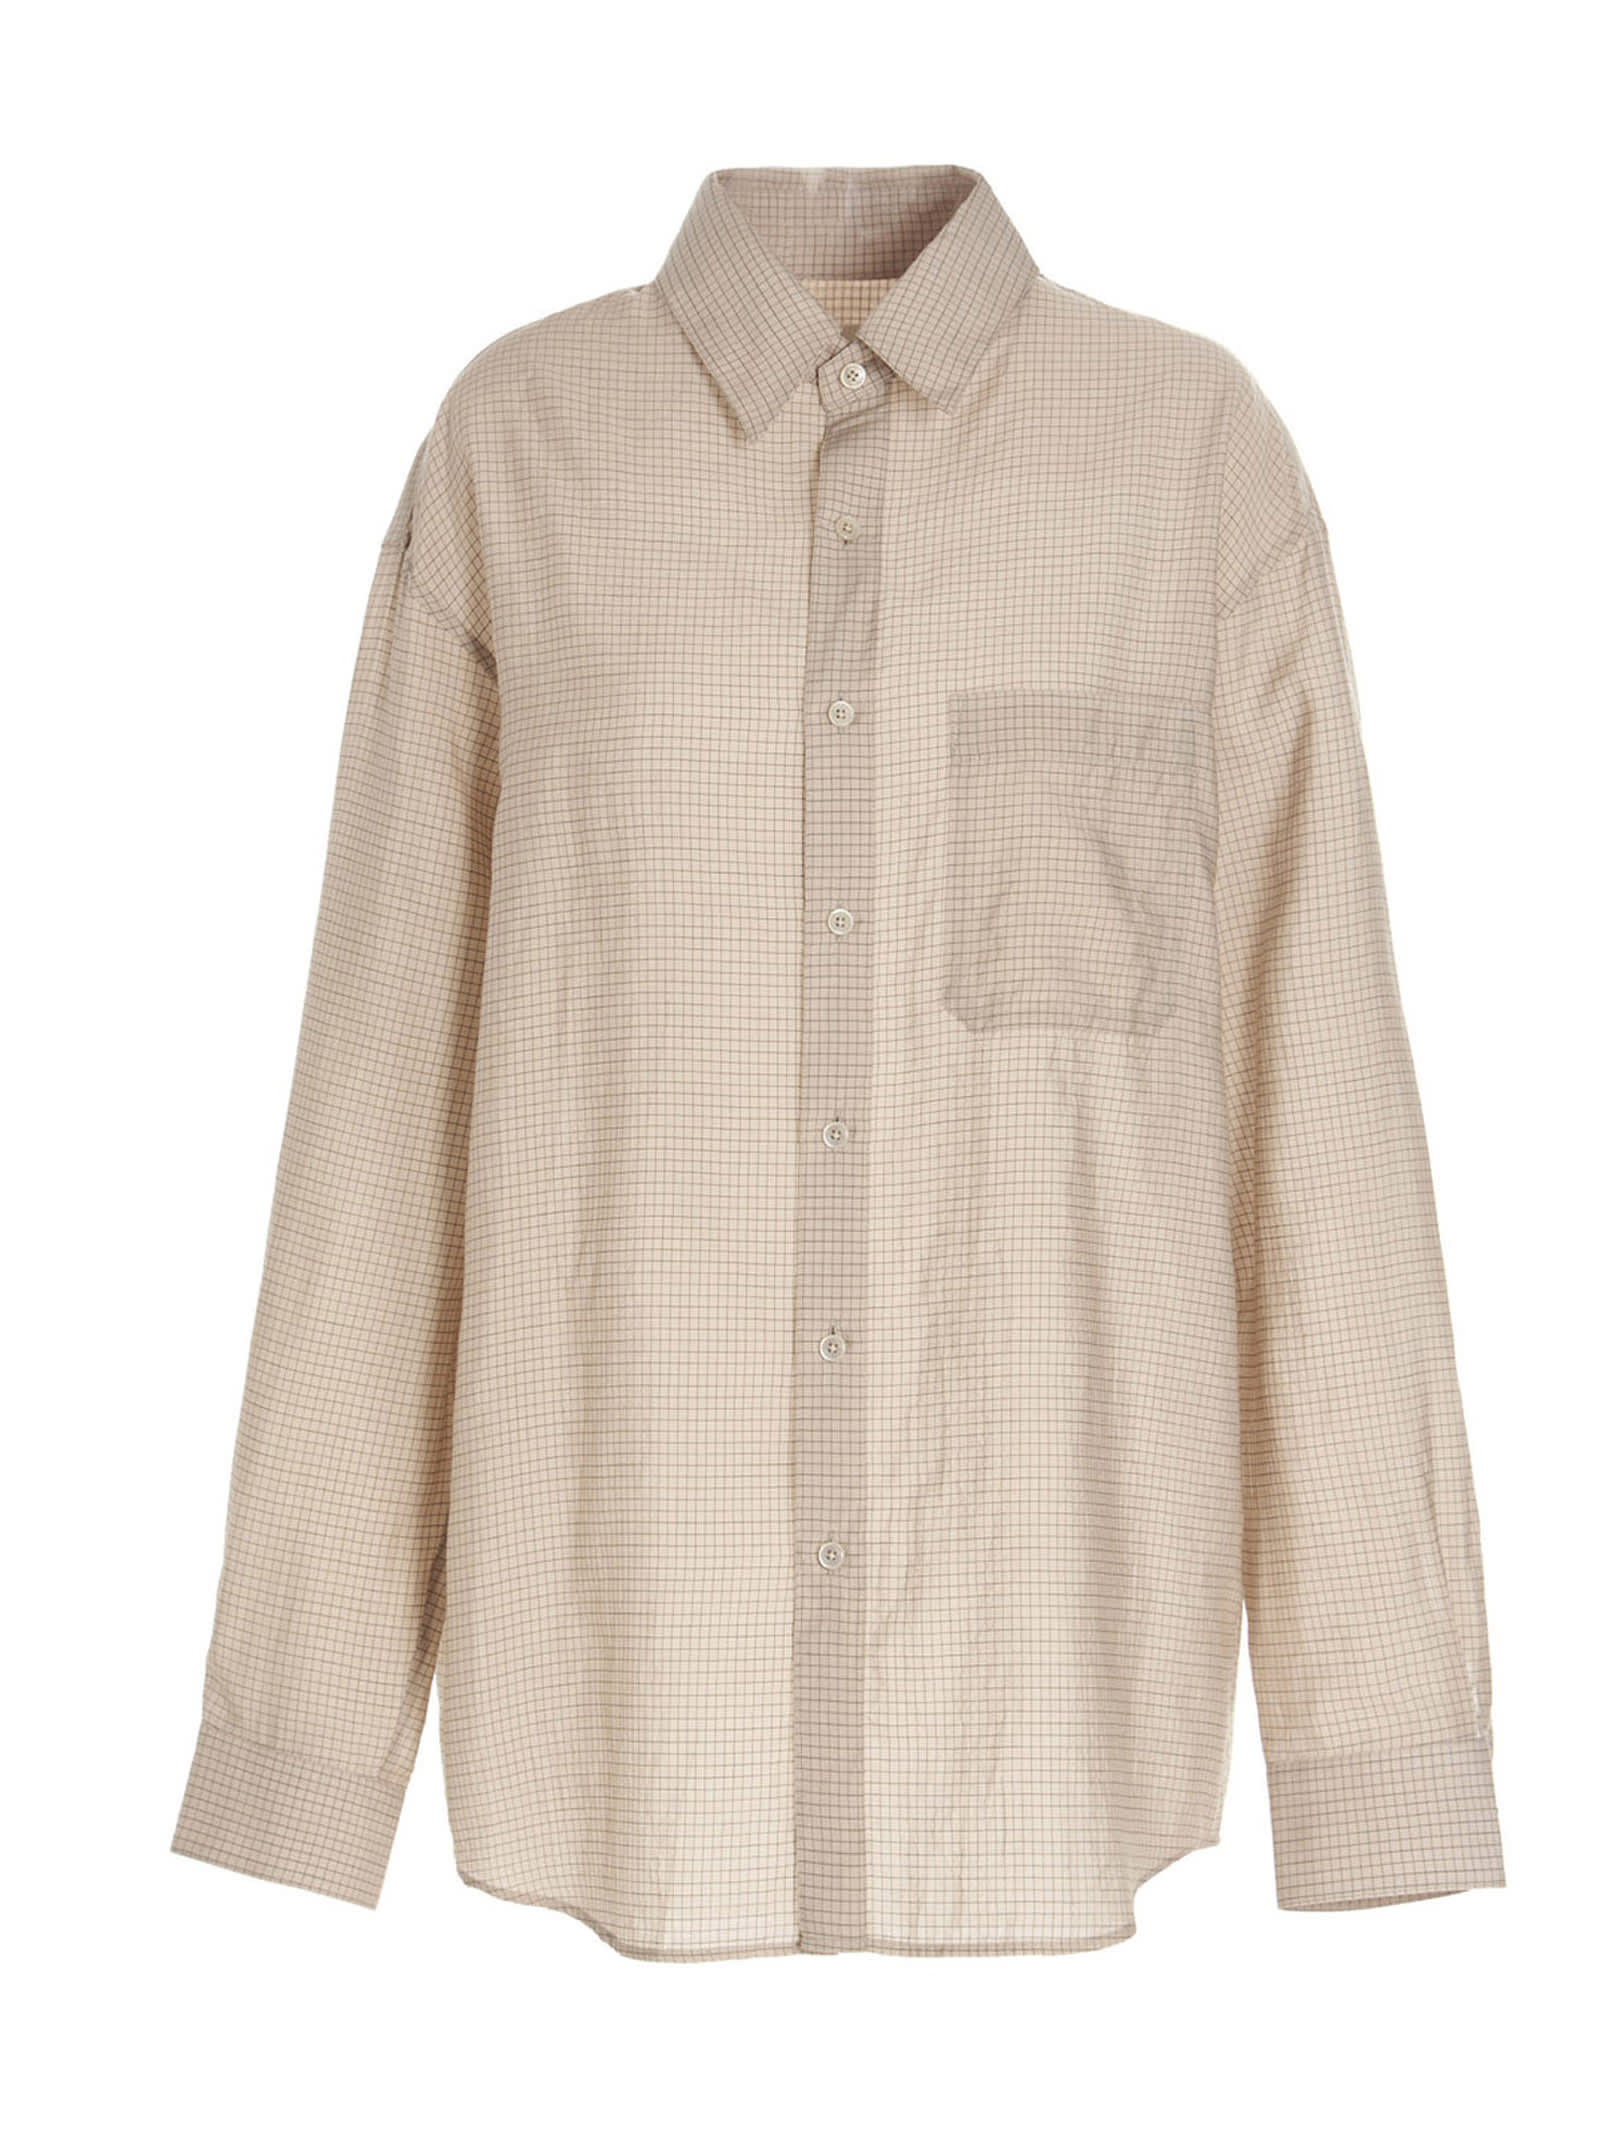 Lemaire Check Shirt